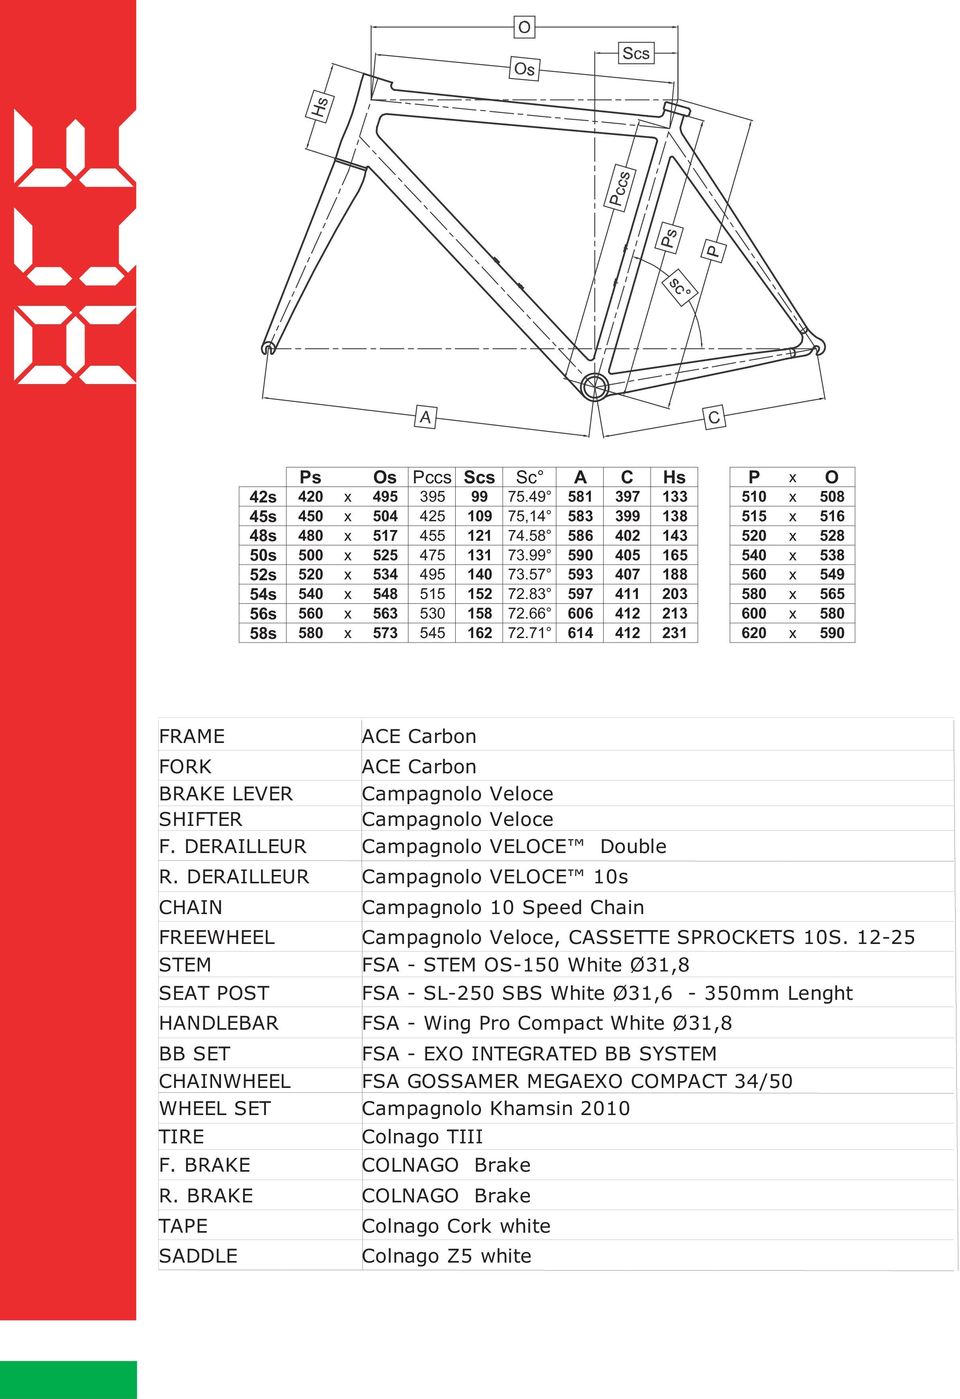 66 606 412 213 600 x 580 58s 580 x 573 545 162 72.71 614 412 231 620 x 590 FRAME ACE Carbon FORK ACE Carbon BRAKE LEVER Campagnolo Veloce SHIFTER Campagnolo Veloce F.